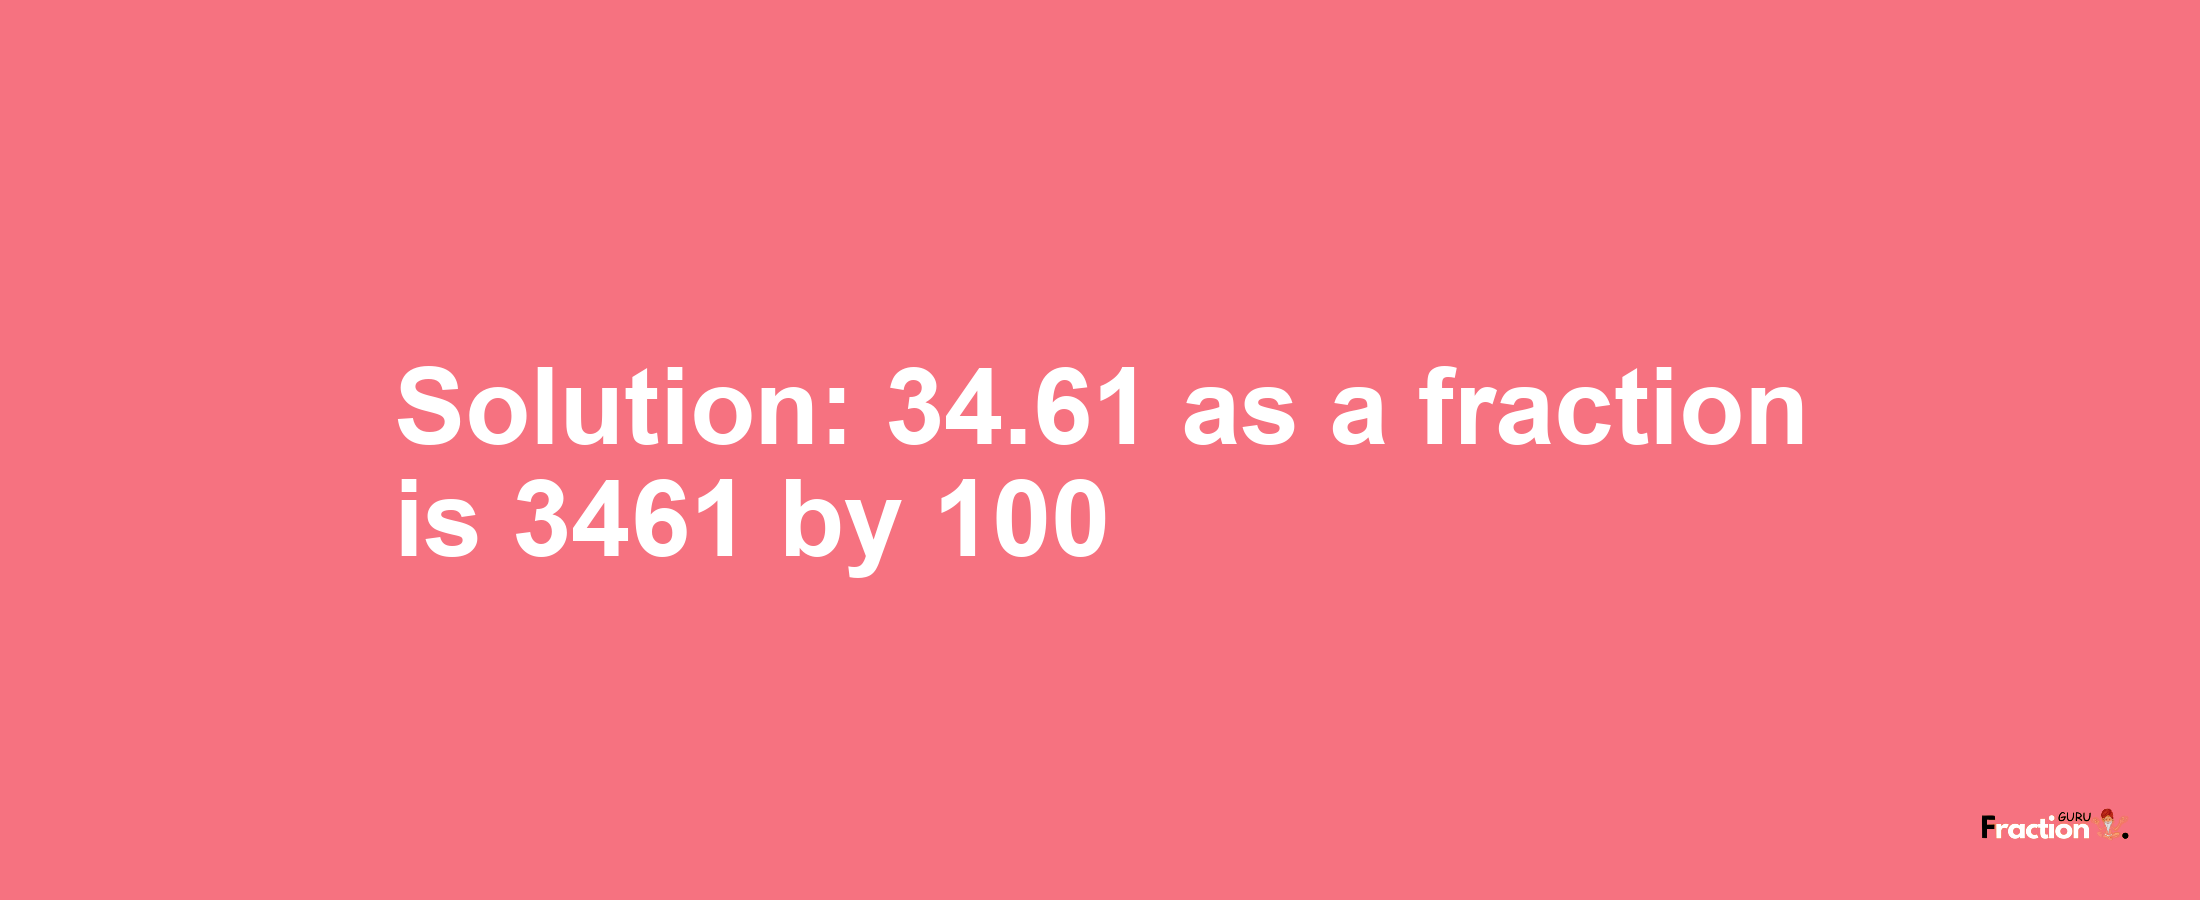 Solution:34.61 as a fraction is 3461/100